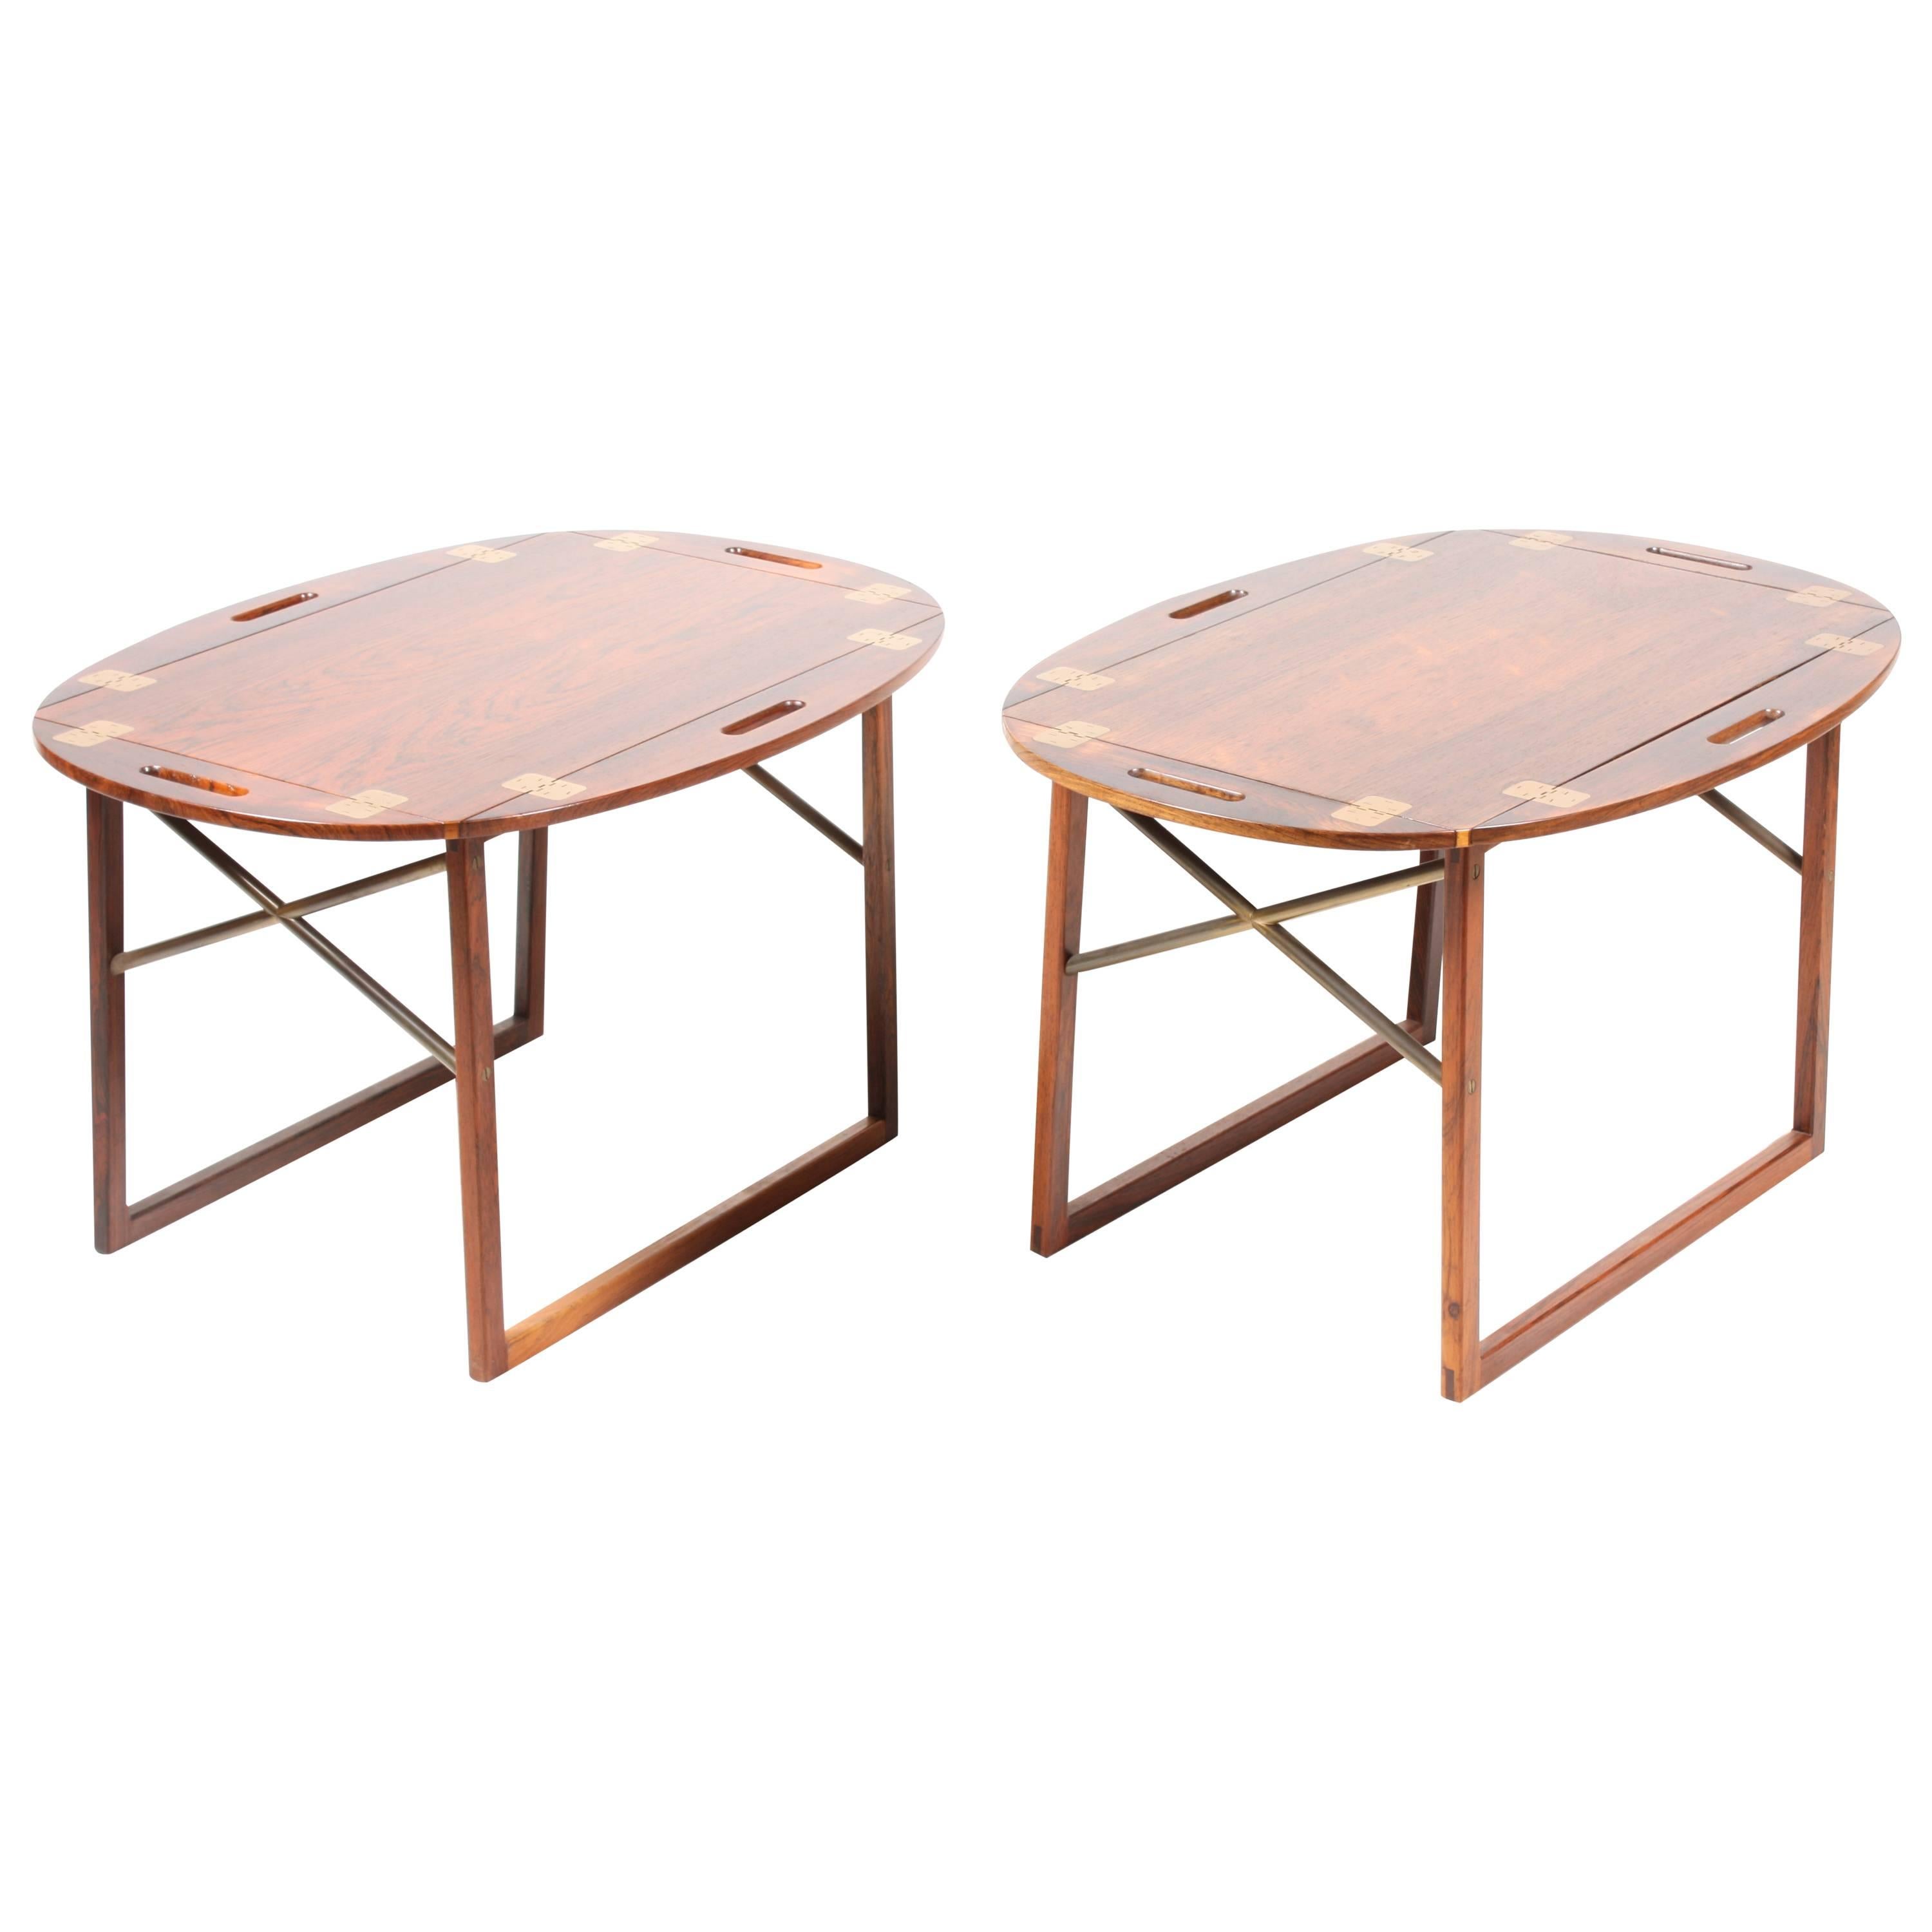 Pair of End Tables by Langkilde